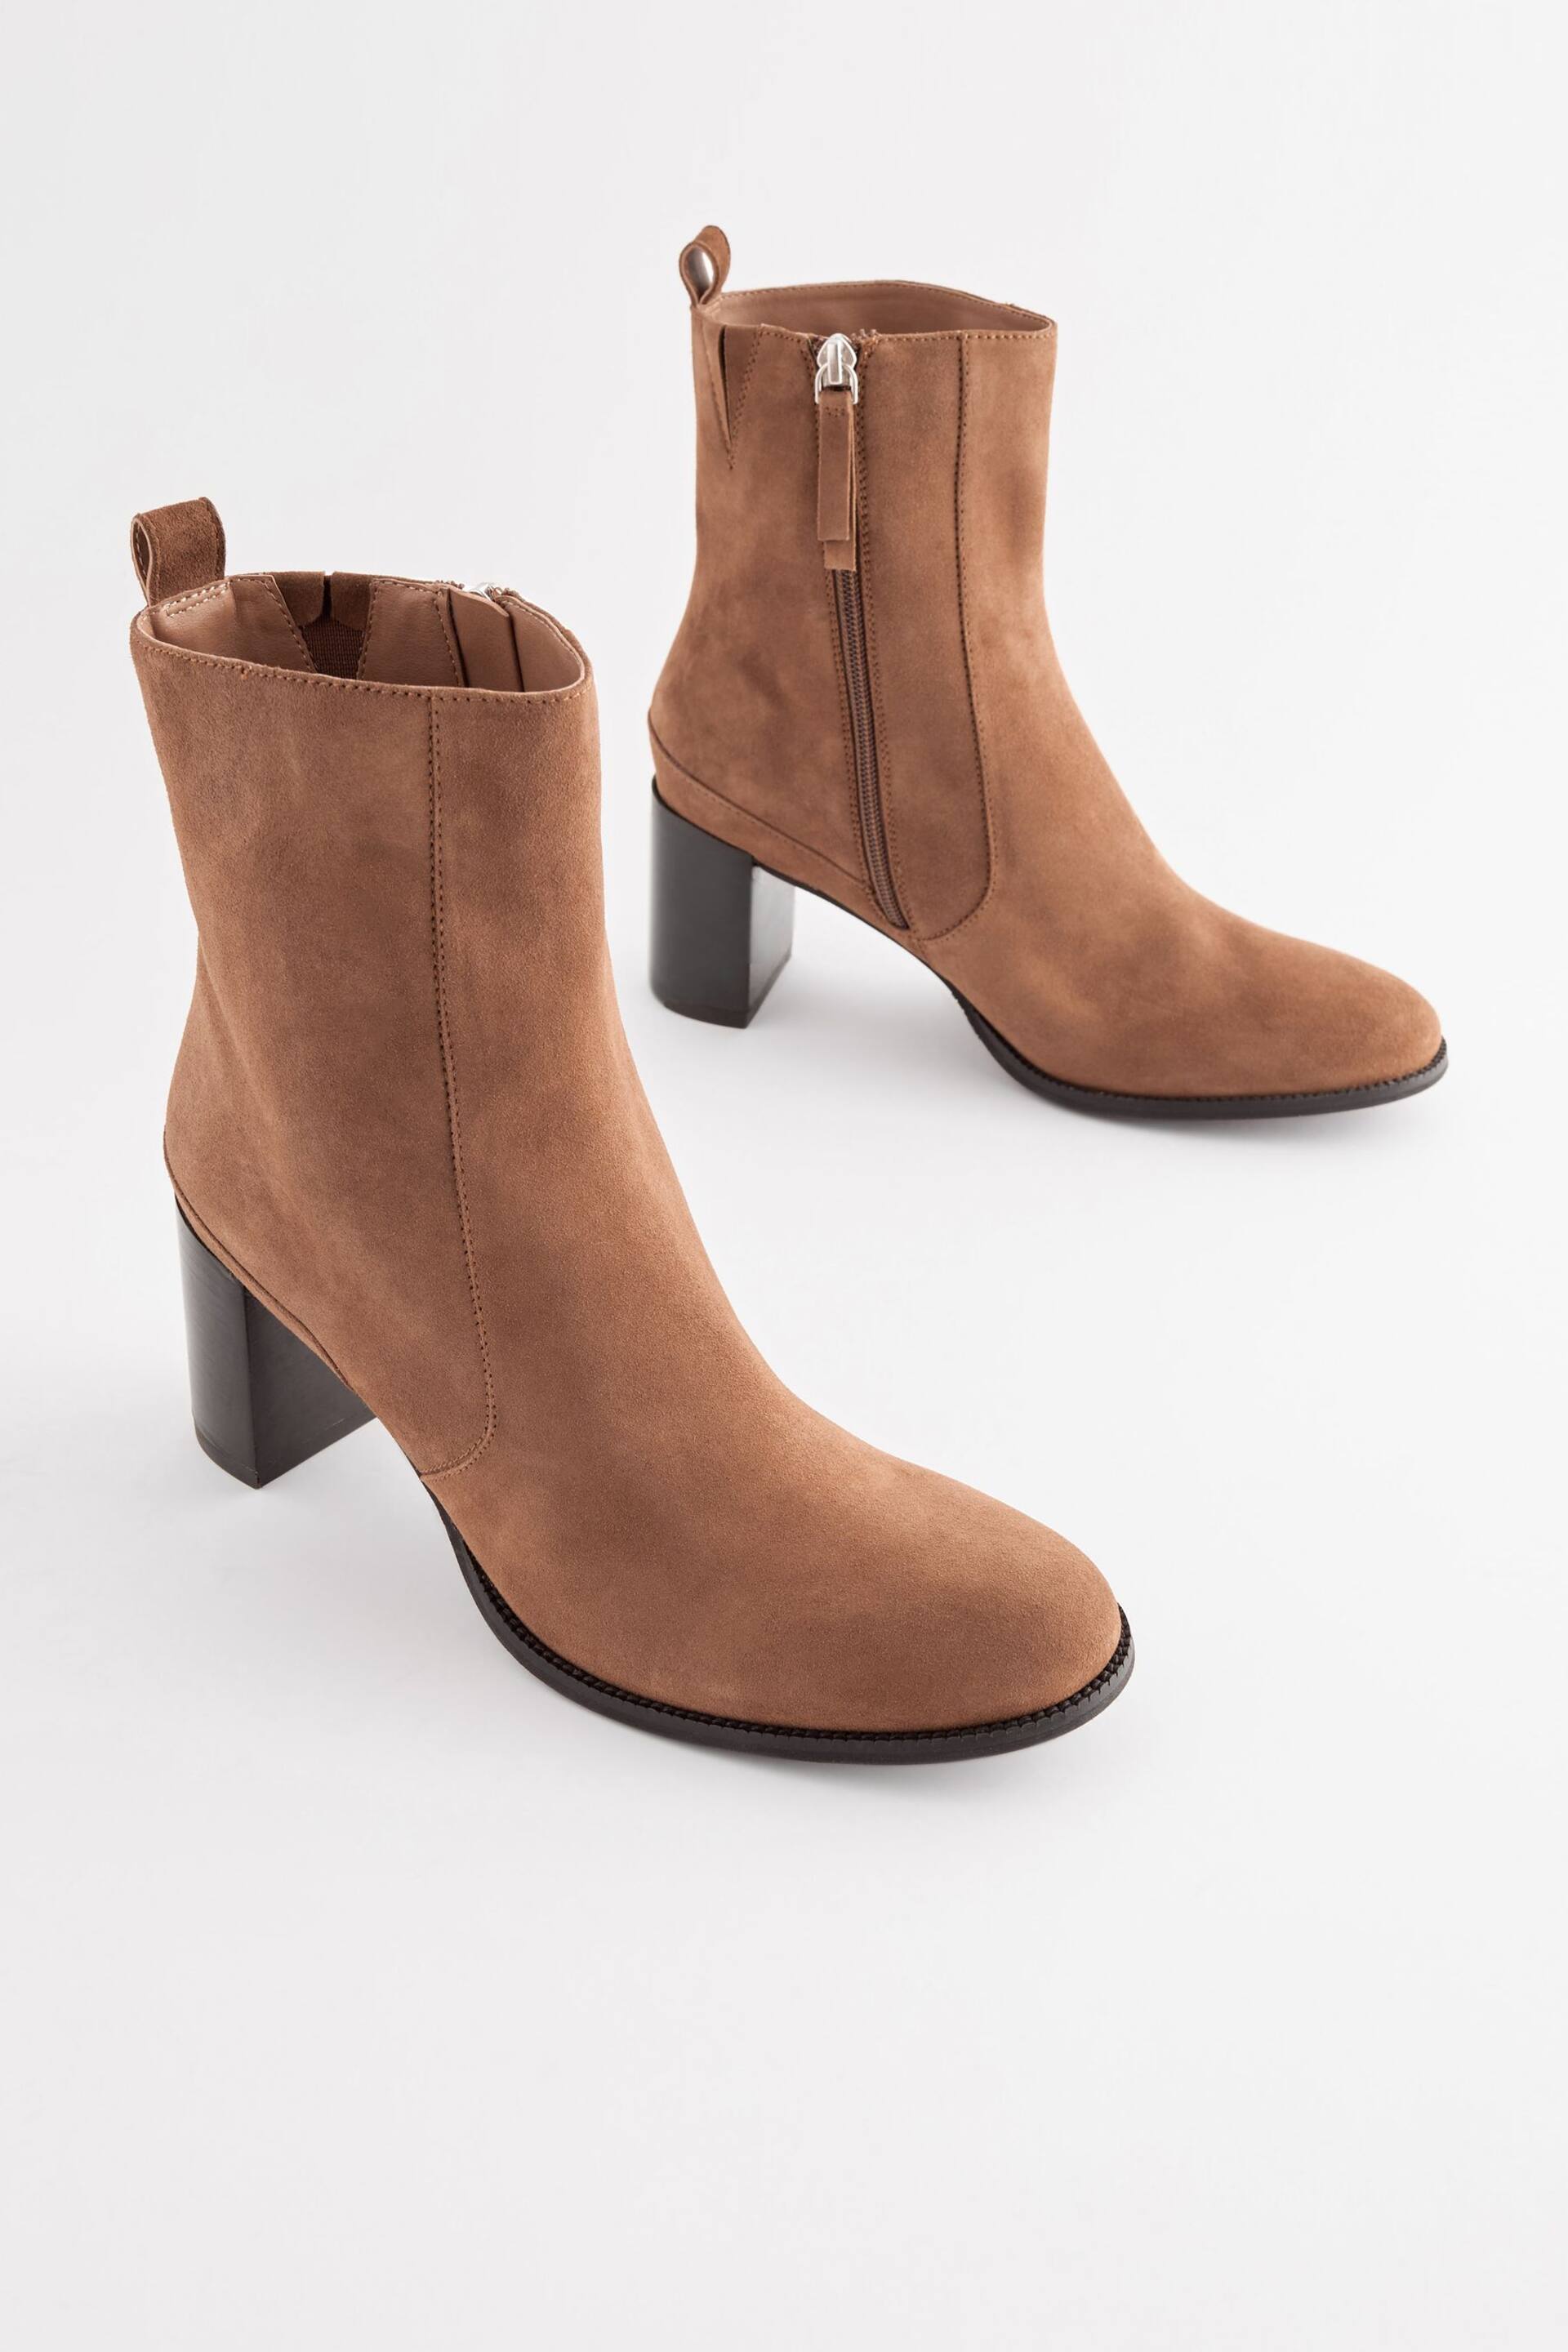 Tan Brown Regular/Wide Fit Forever Comfort® Leather Ankle Heeled Boots - Image 3 of 6